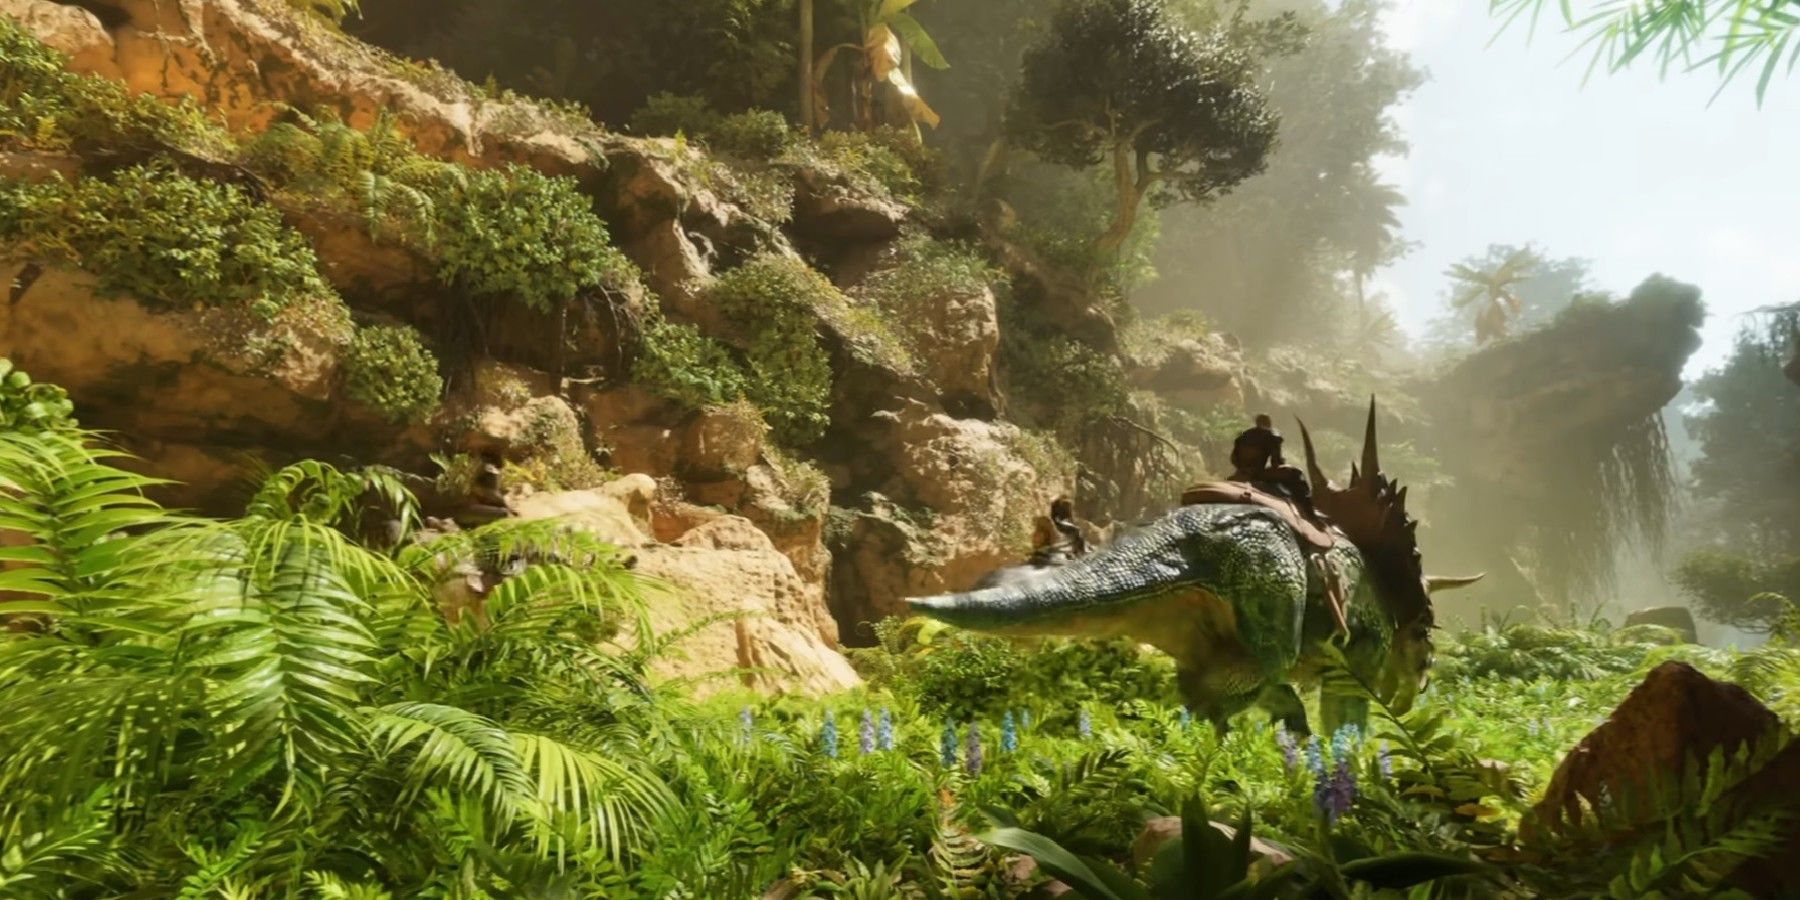 Ark 2' release date: Is 'Ark Survival Evolved' coming to the PS5?